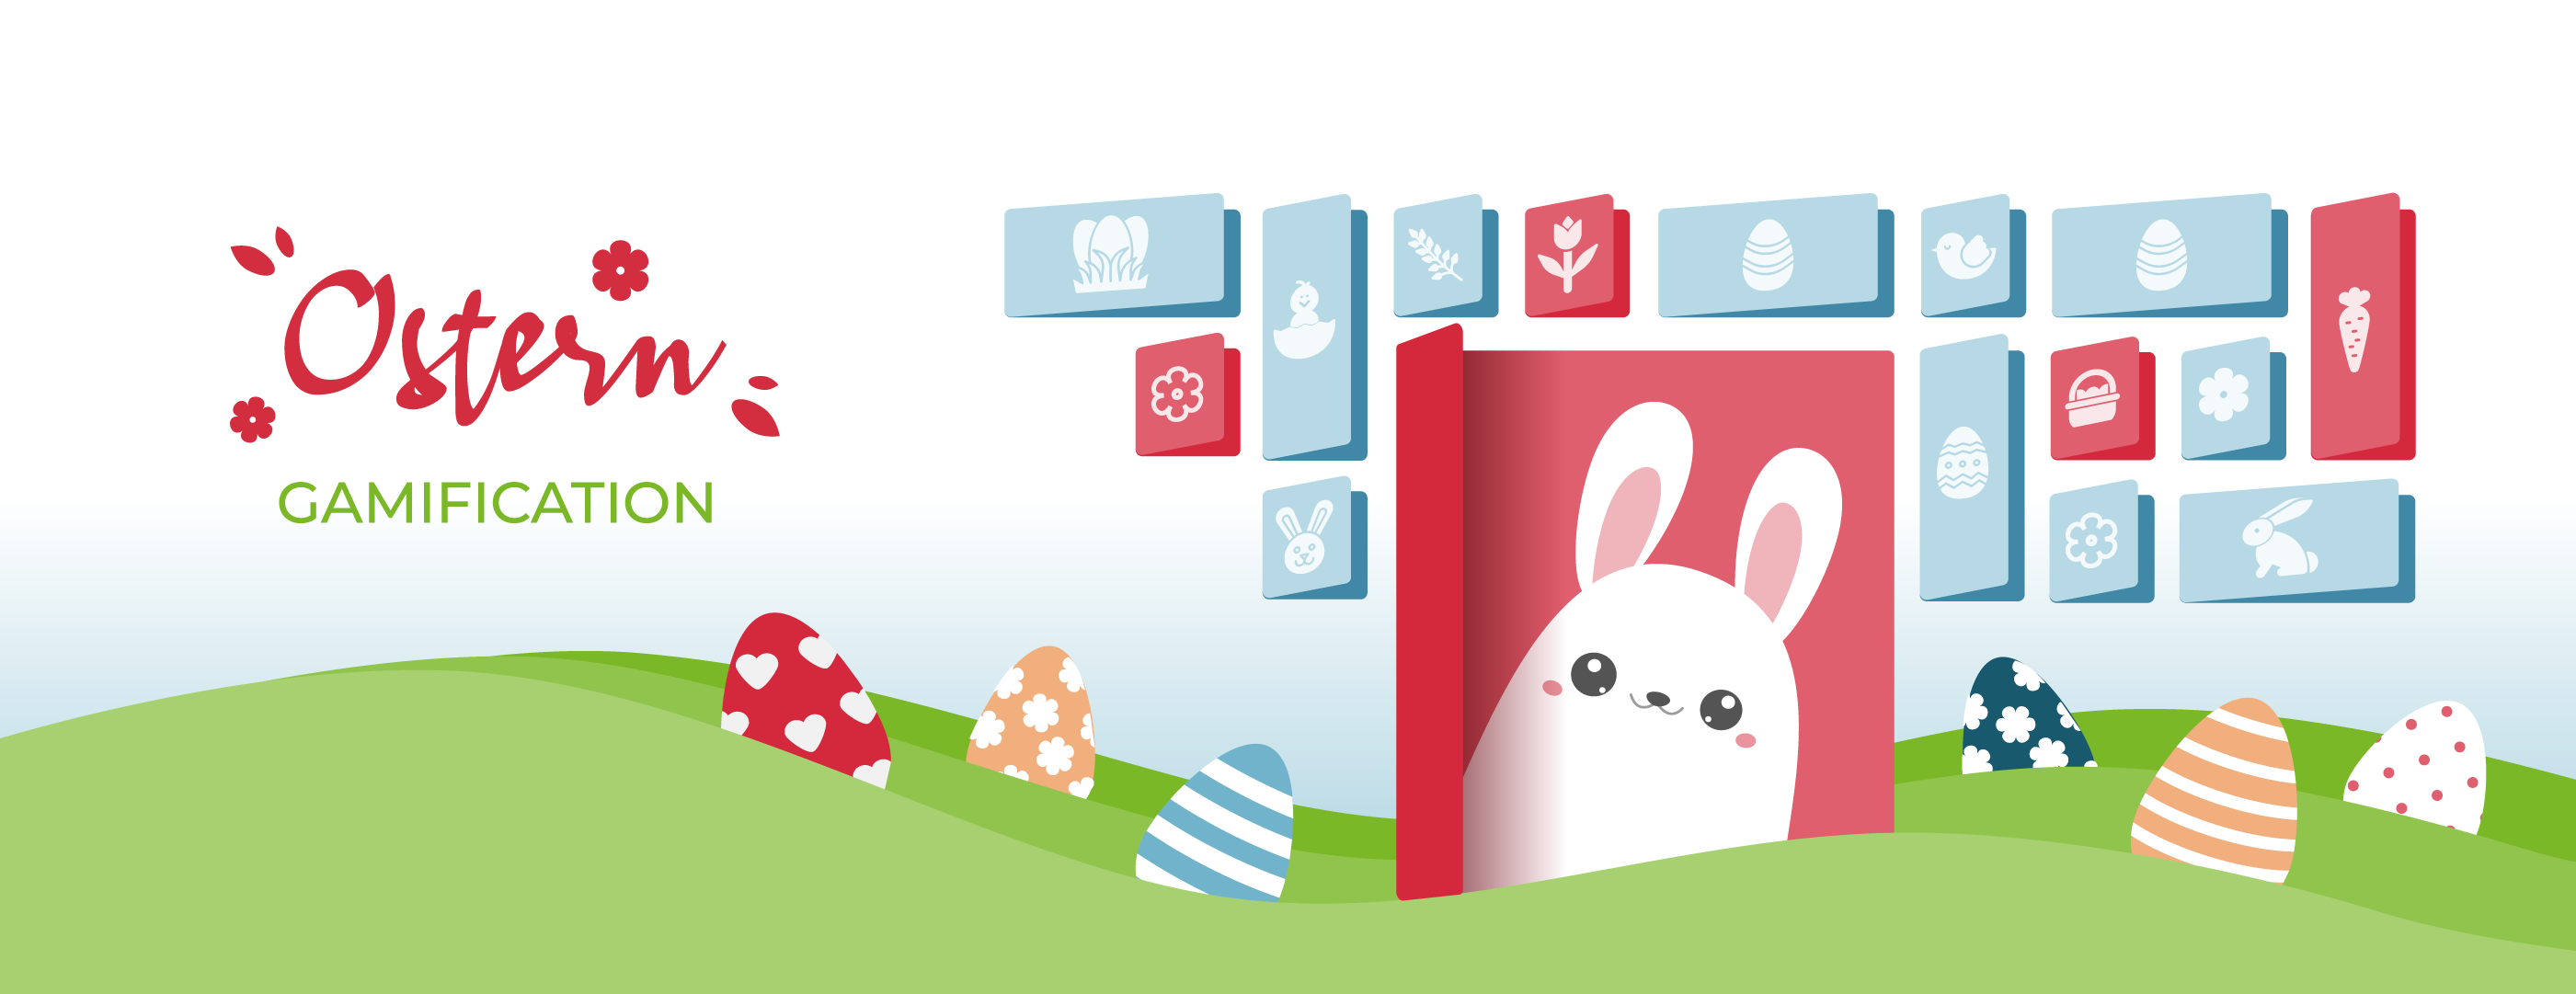 W4_header_image_Easter_Gamification_A_DE